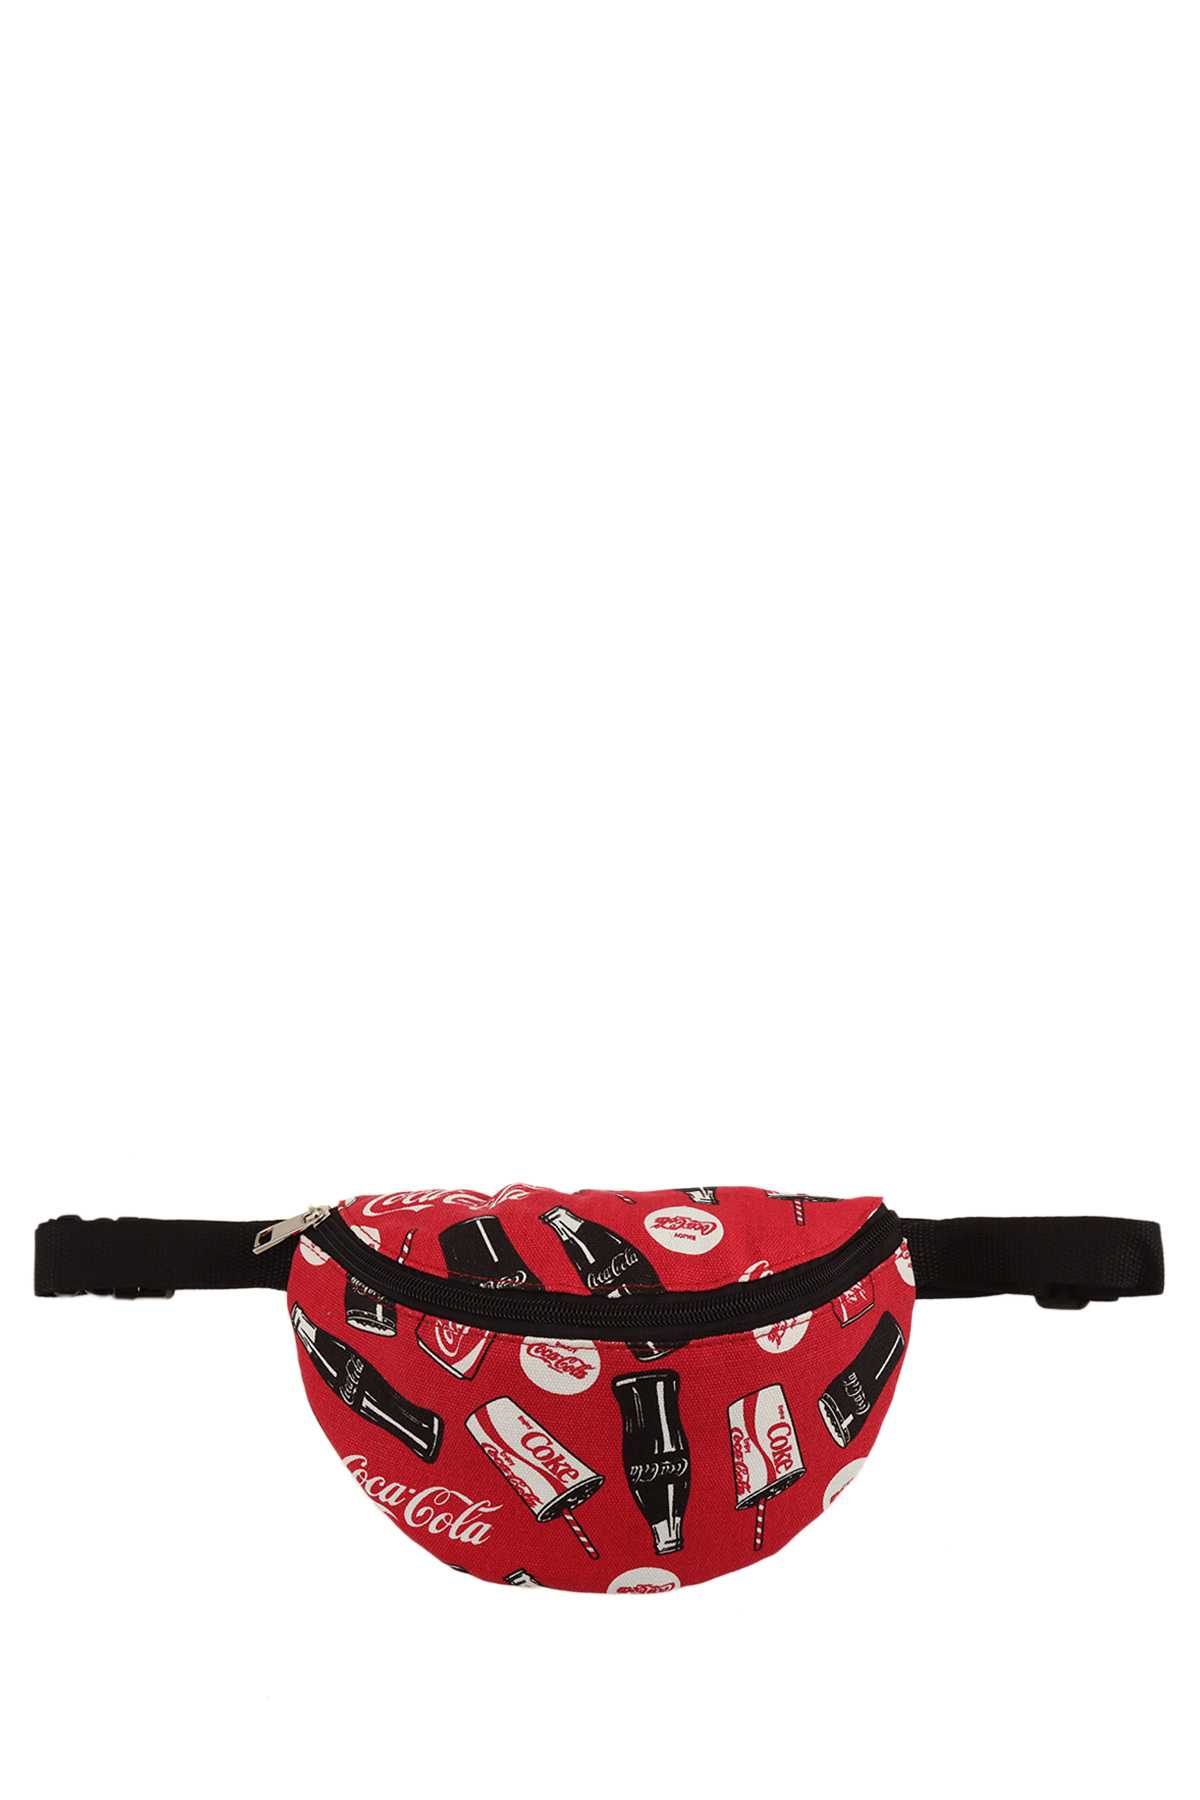 Officially Licensed Coca-Cola Fanny Pack